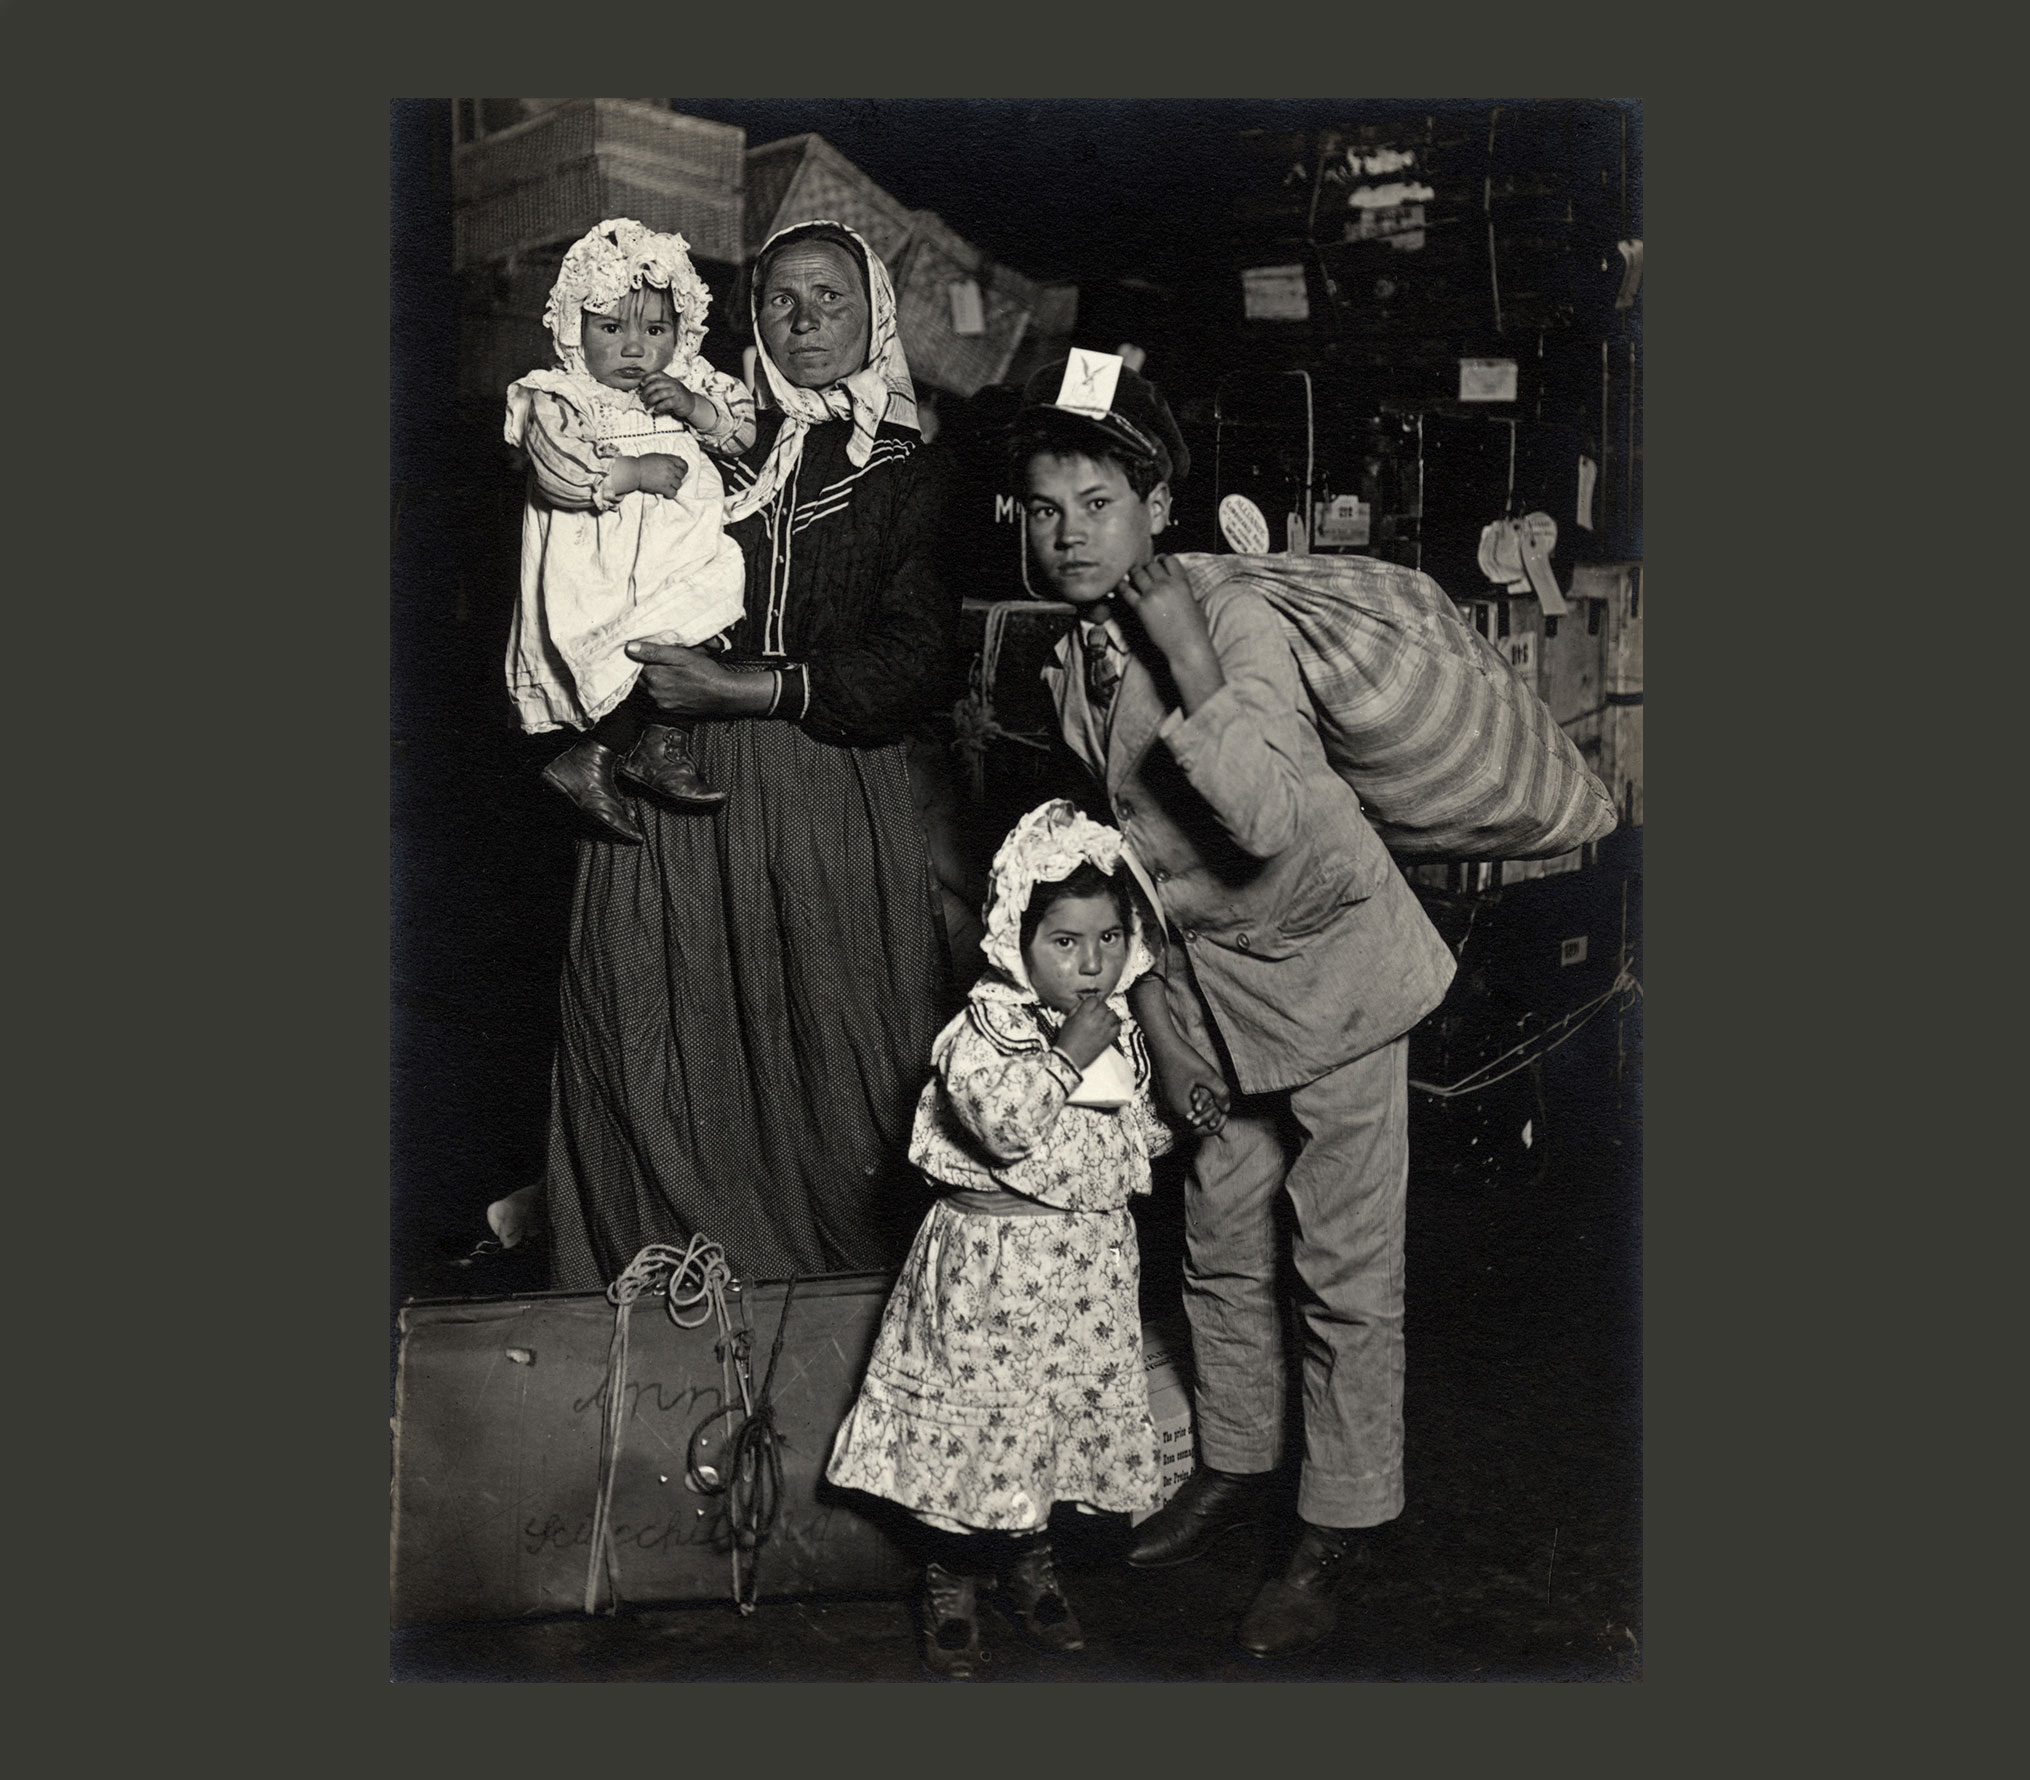 Historic photograph by Lewis Hine titled "Italian Family Seeking Lost Luggage"